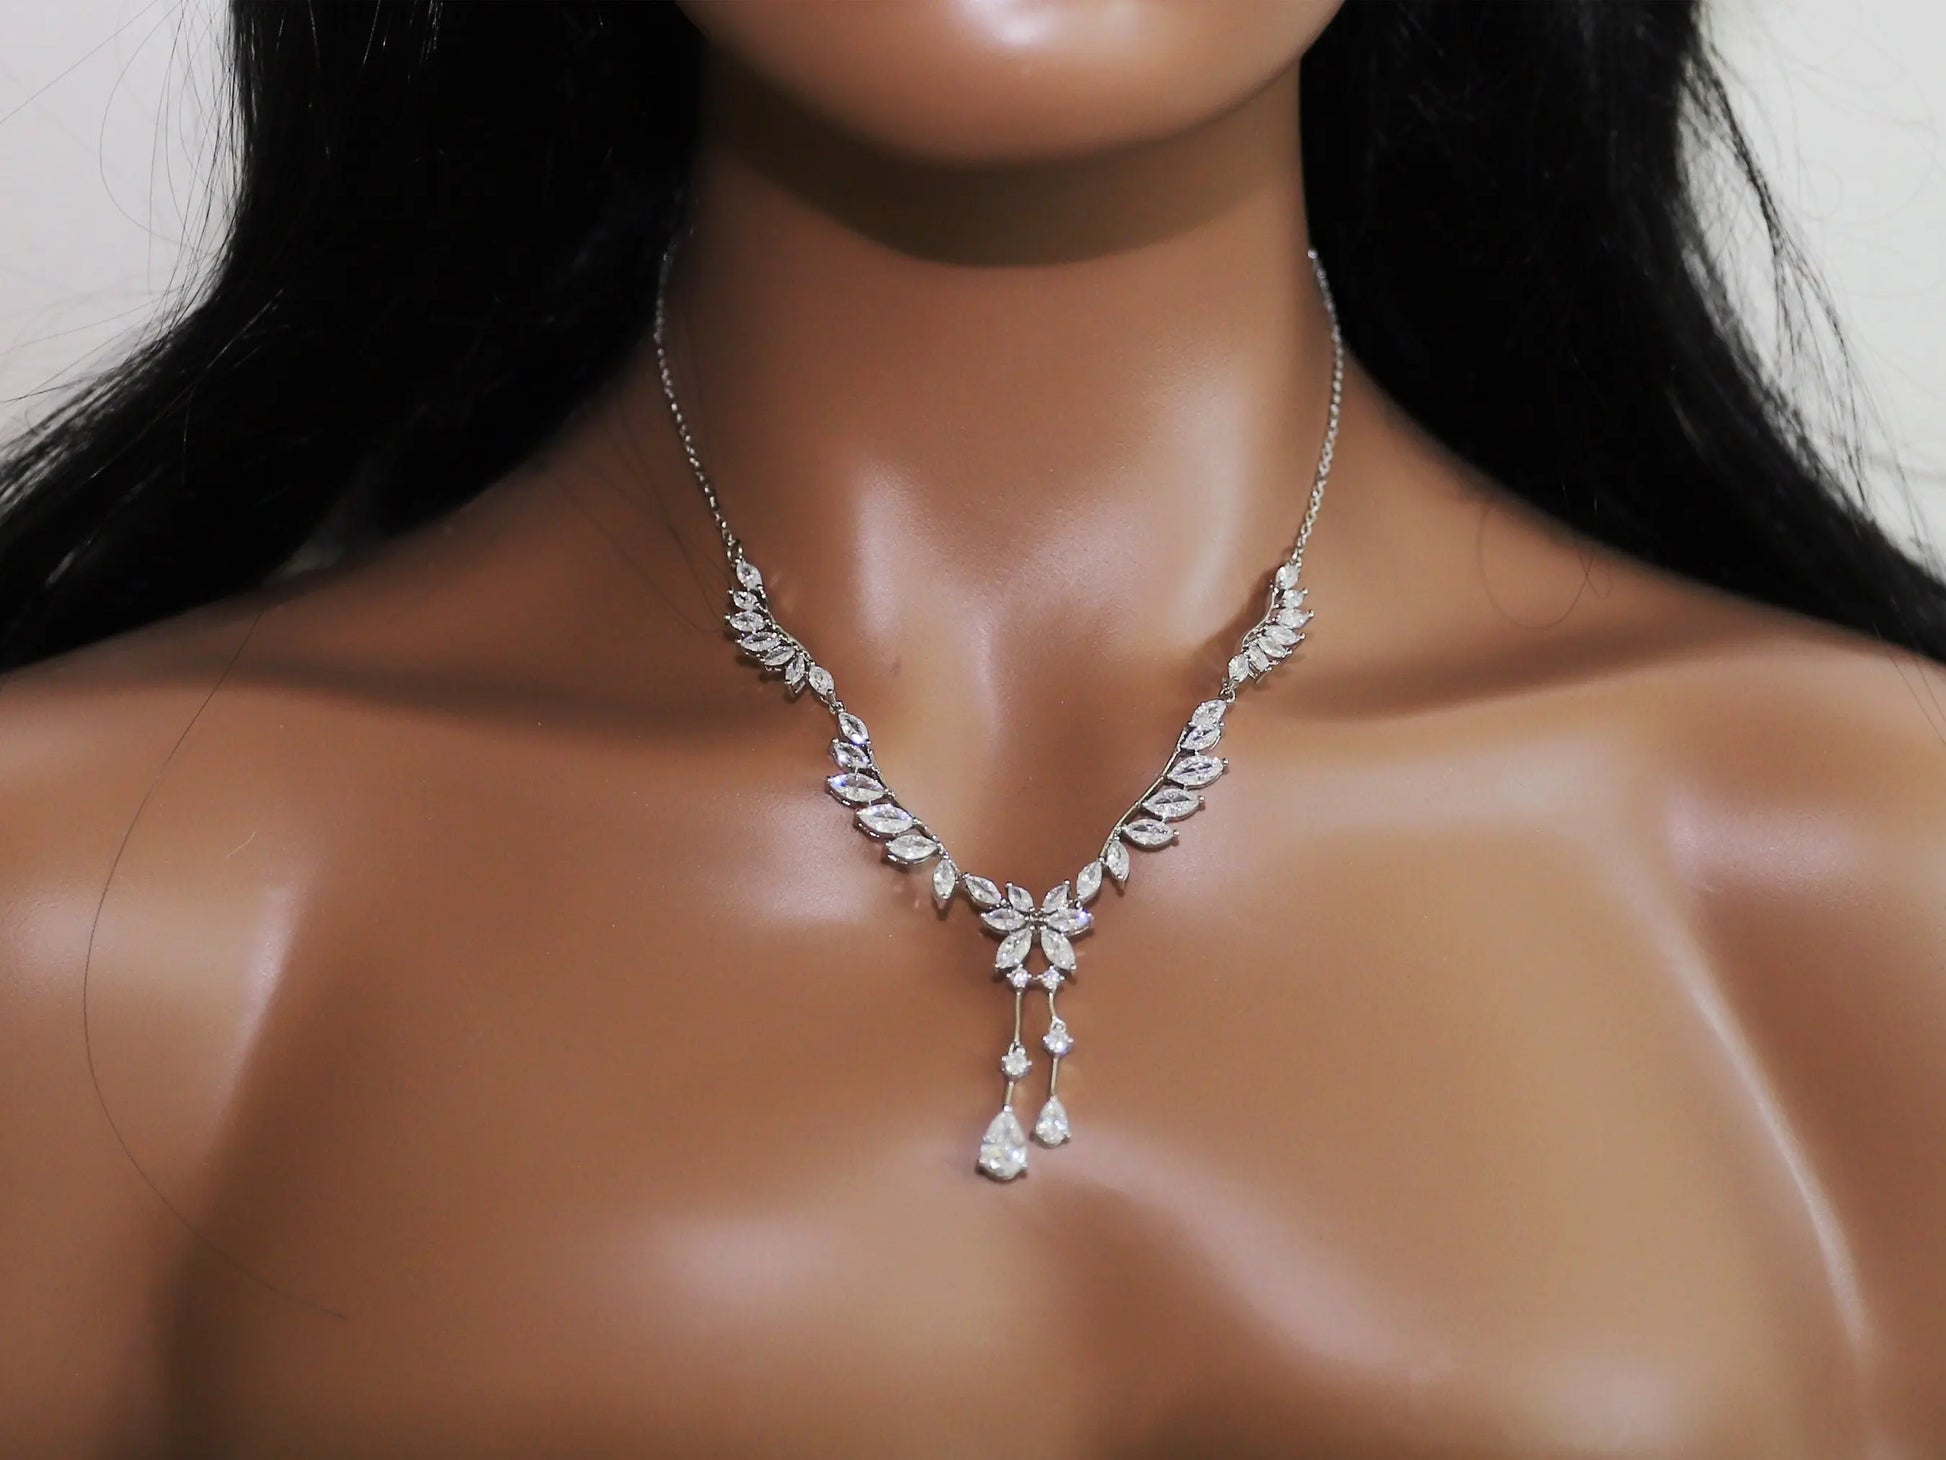 Delightful Silver Angel Wings Necklace and Earring Set - Silver Kebble Jewelry